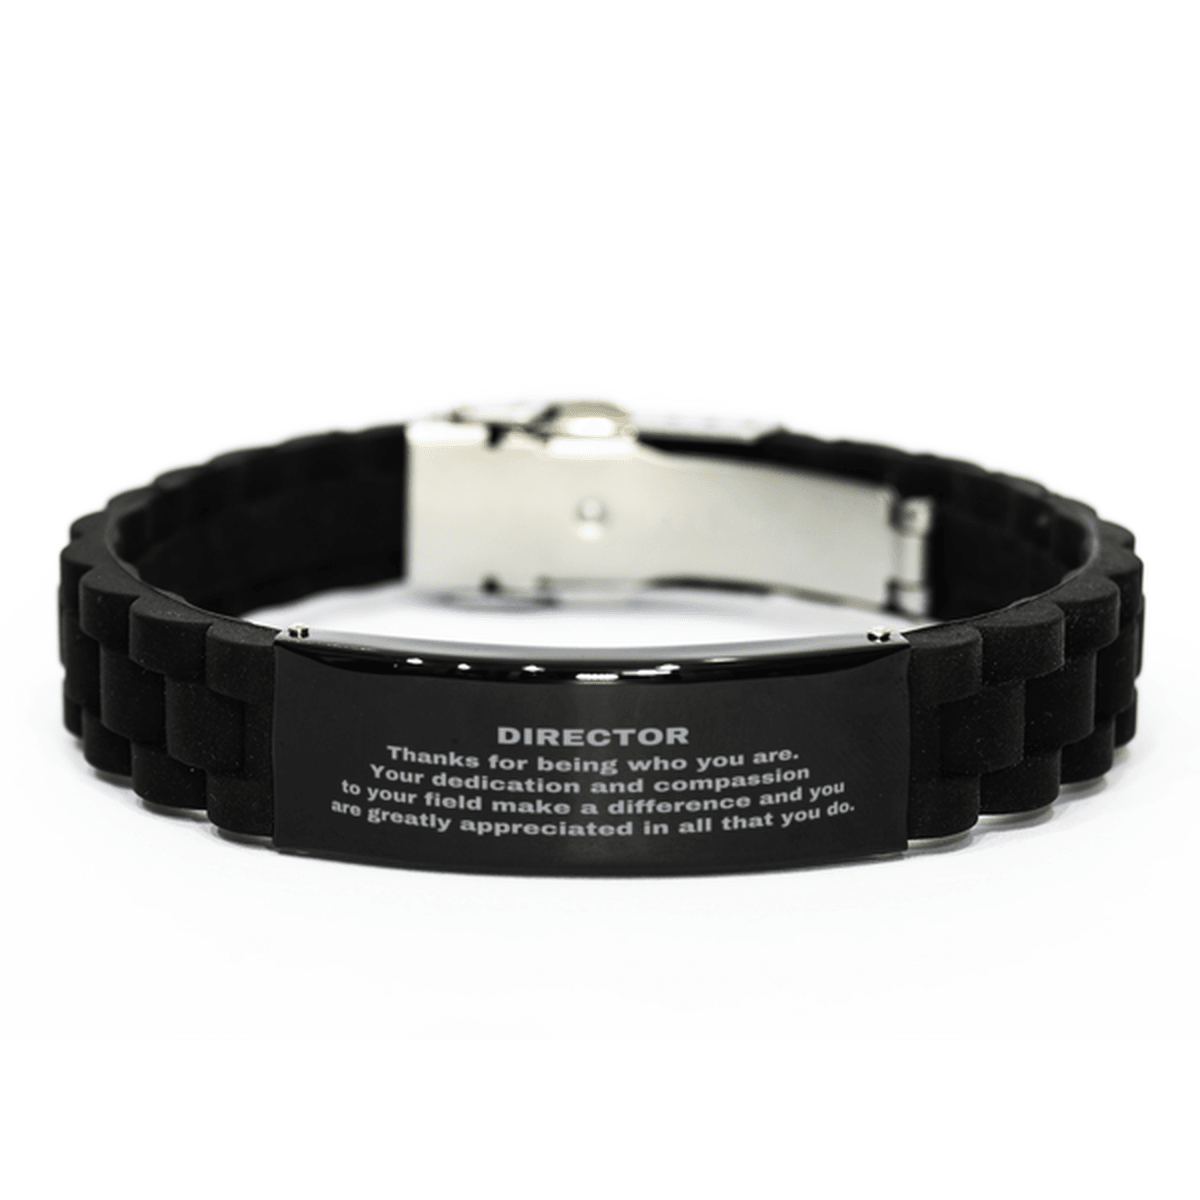 Director Black Glidelock Clasp Engraved Bracelet - Thanks for being who you are - Birthday Christmas Jewelry Gifts Coworkers Colleague Boss - Mallard Moon Gift Shop